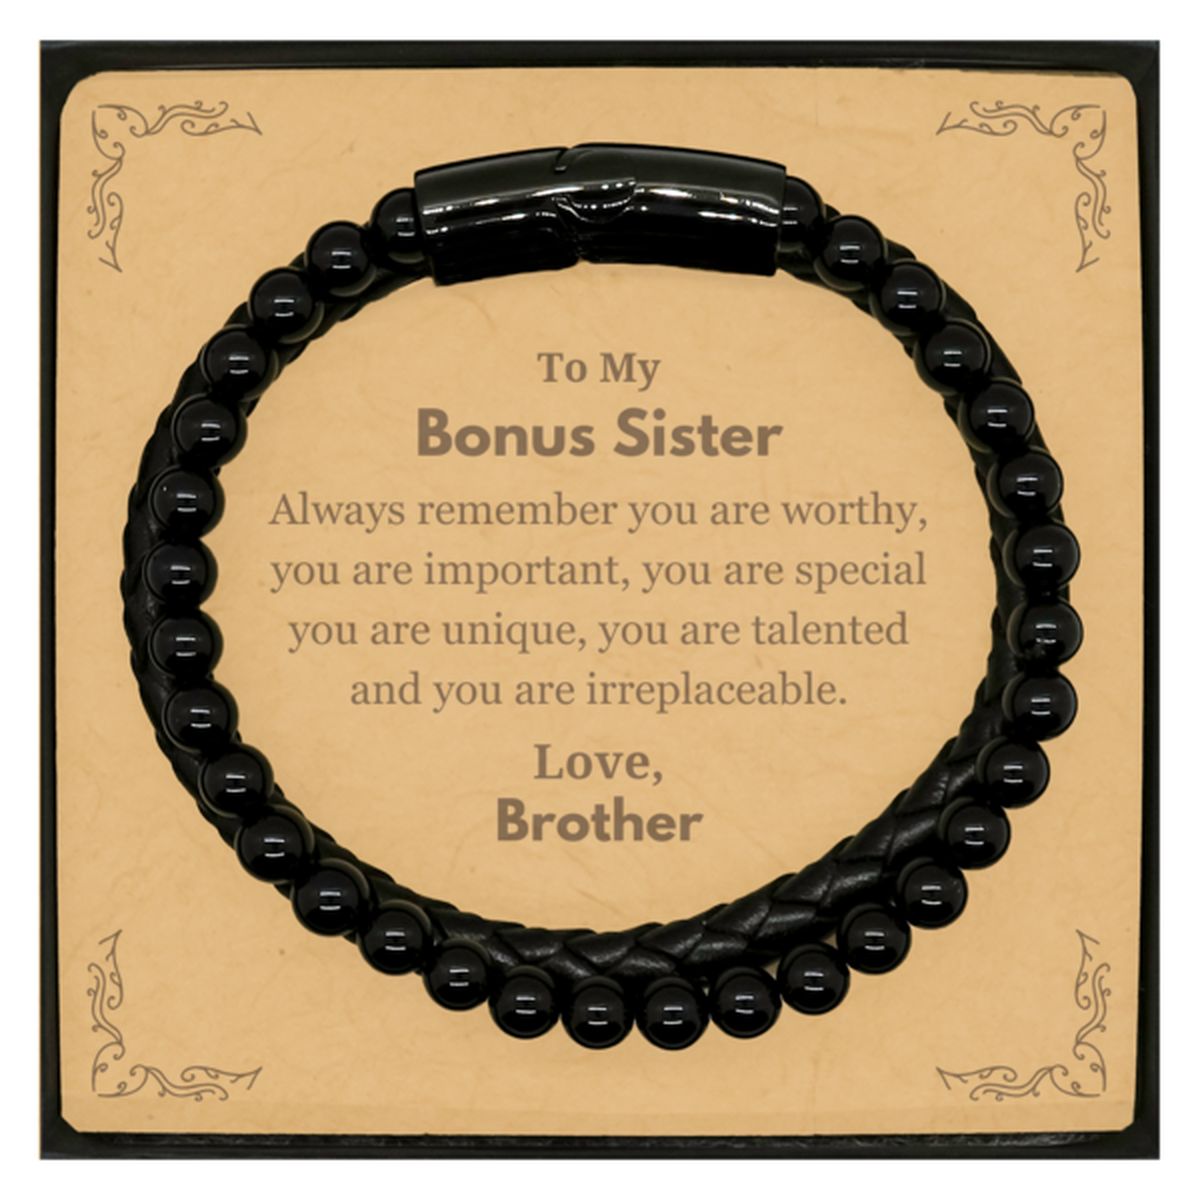 Bonus Sister Birthday Gifts from Brother, Inspirational Stone Leather Bracelets for Bonus Sister Christmas Graduation Gifts for Bonus Sister Always remember you are worthy, you are important. Love, Brother